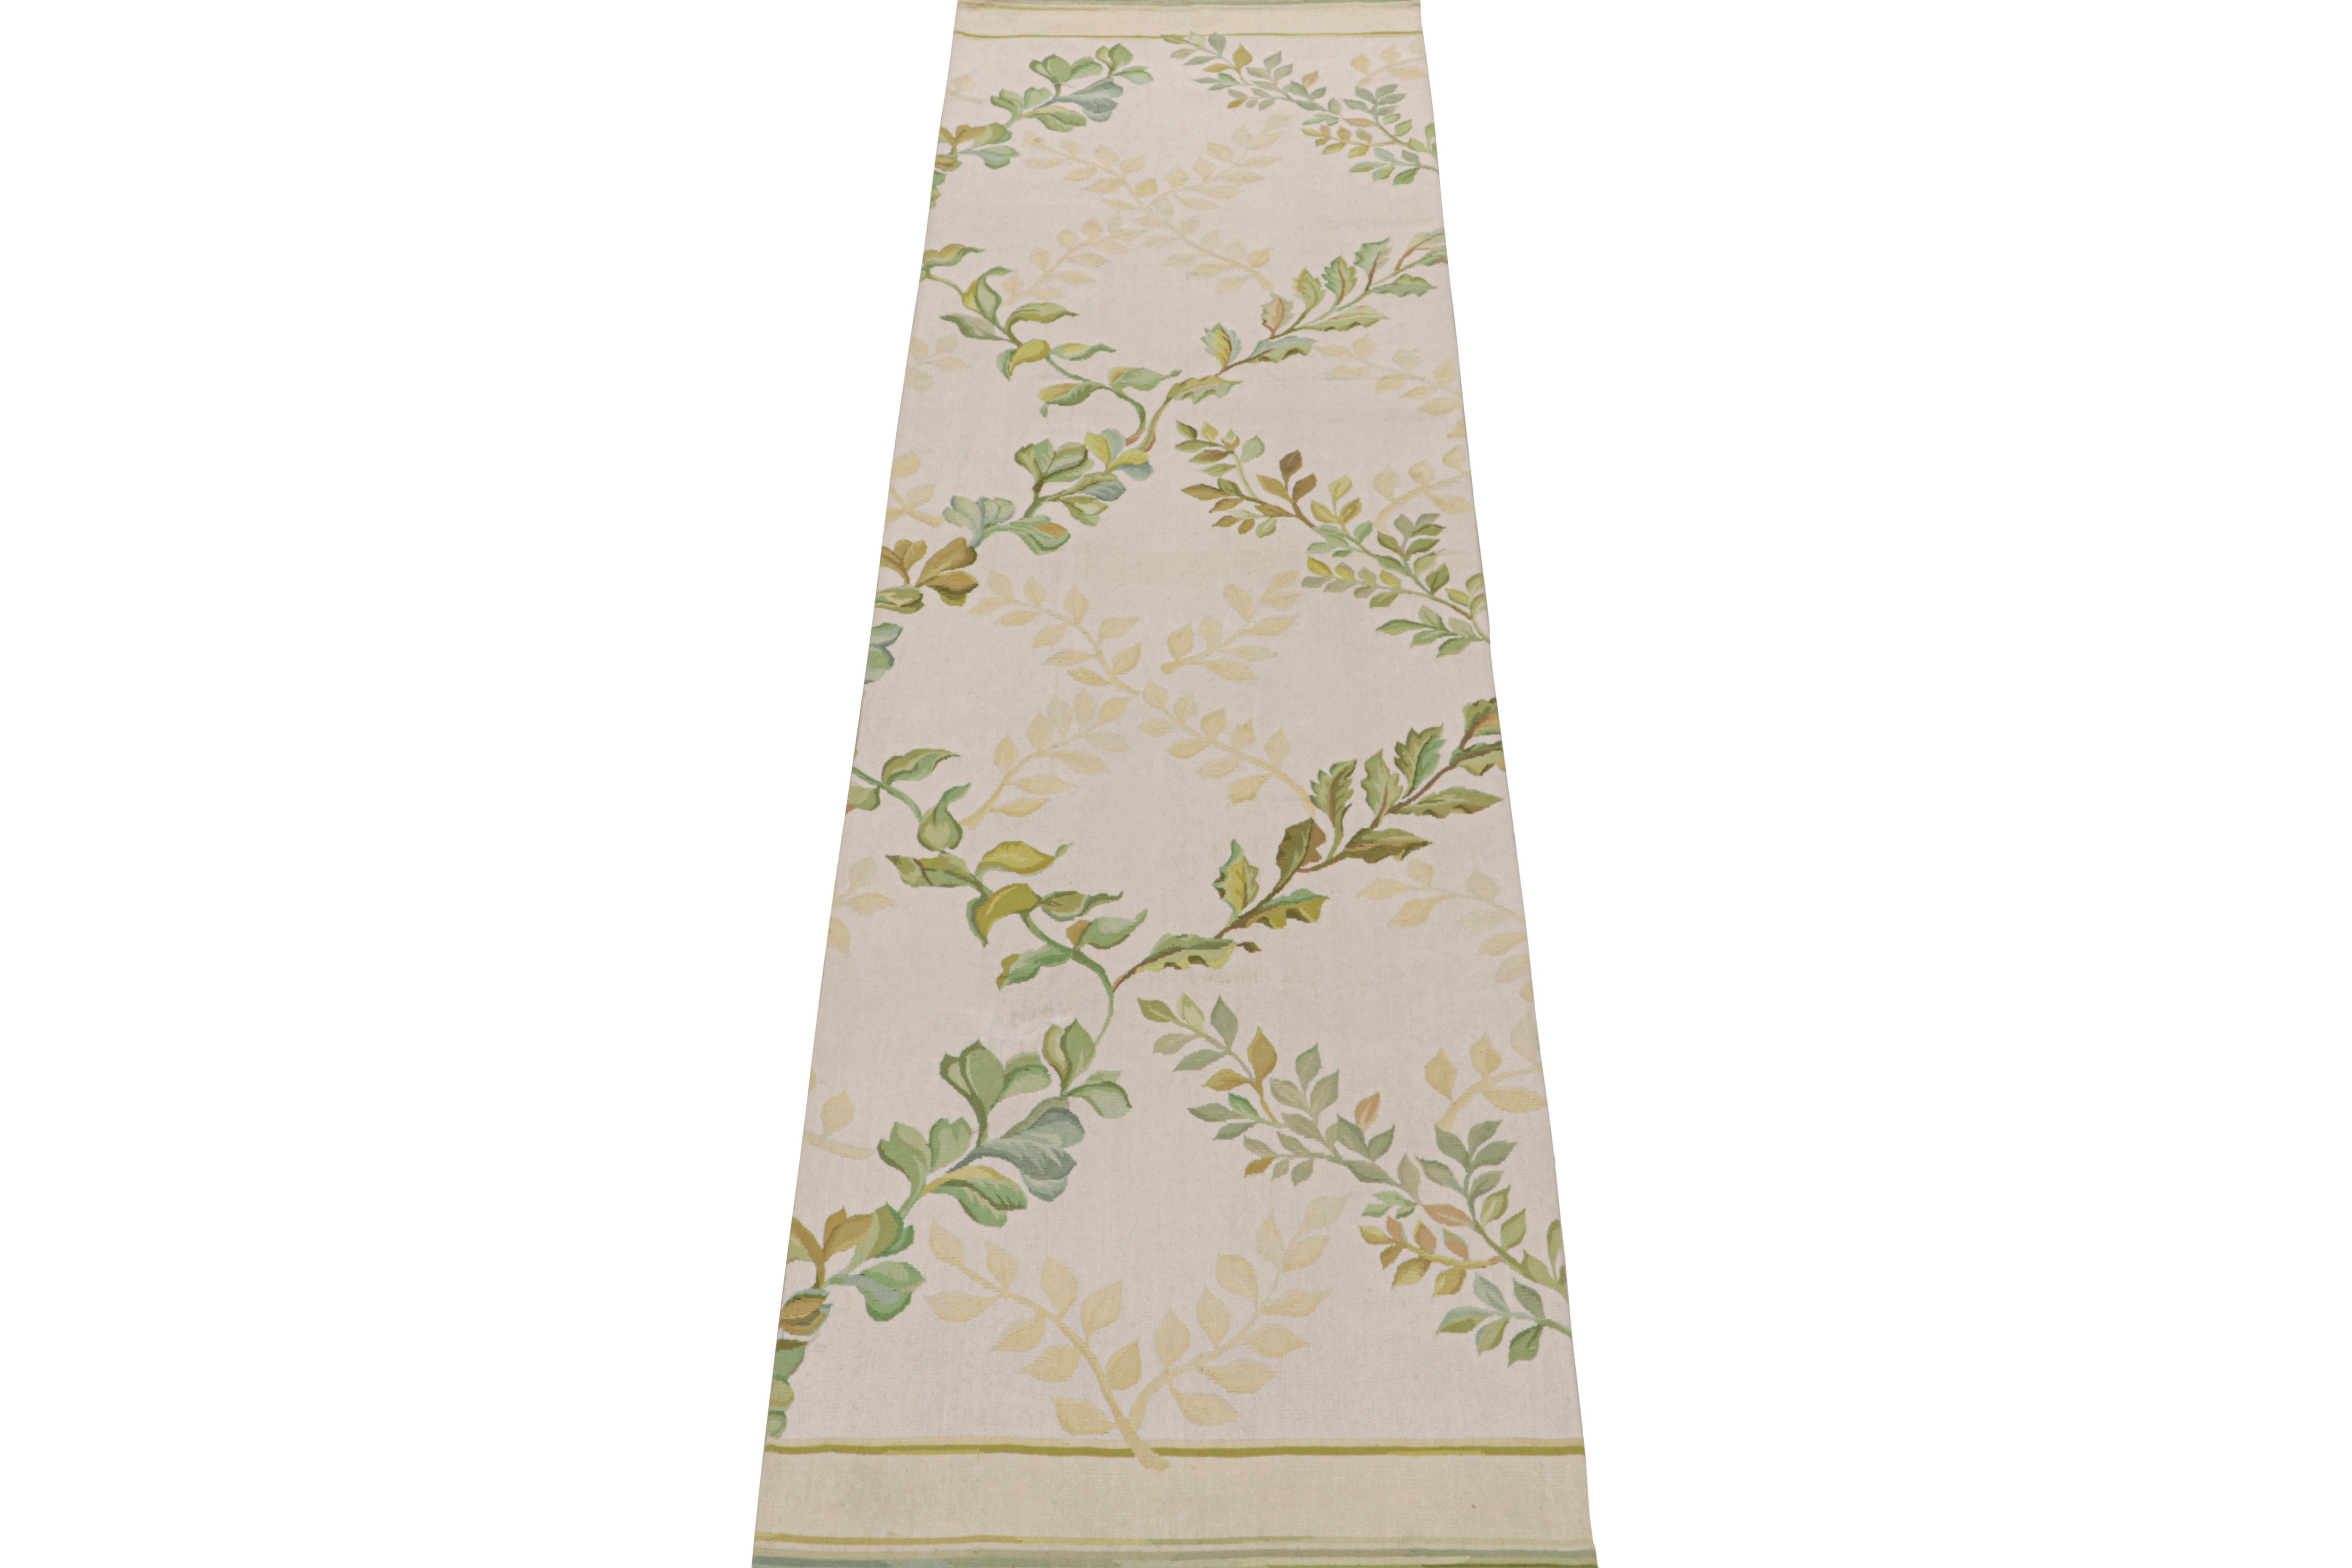 Chinese Rug & Kilim’s Tudor Style Flatweave Runner in Cream and Green Floral Patterns For Sale